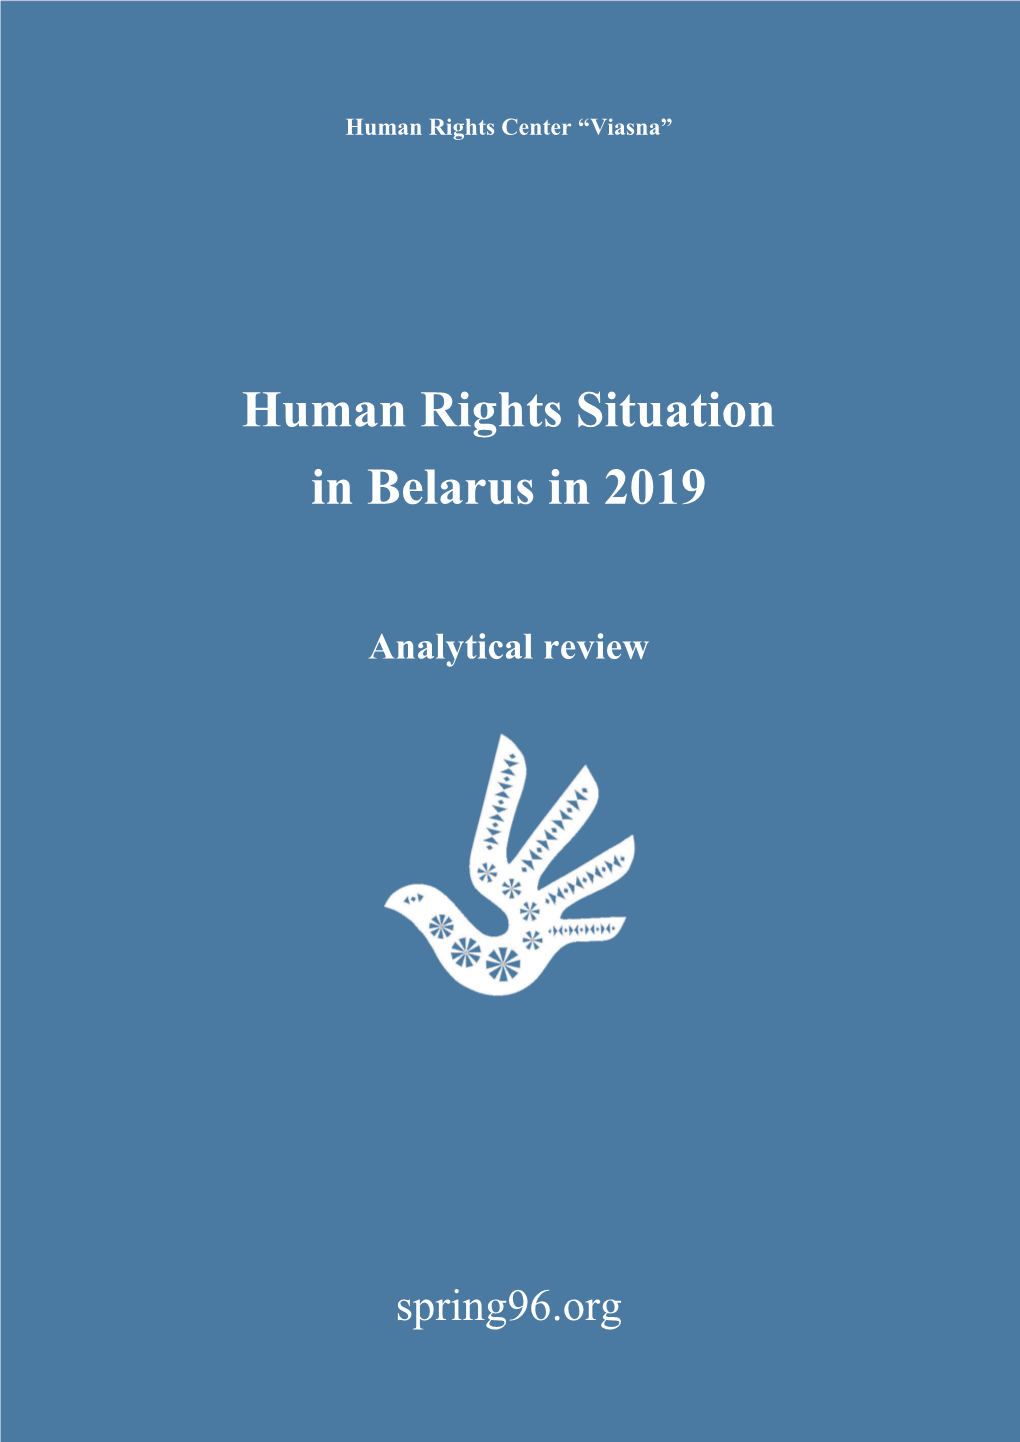 Human Rights Situation in Belarus in 2019